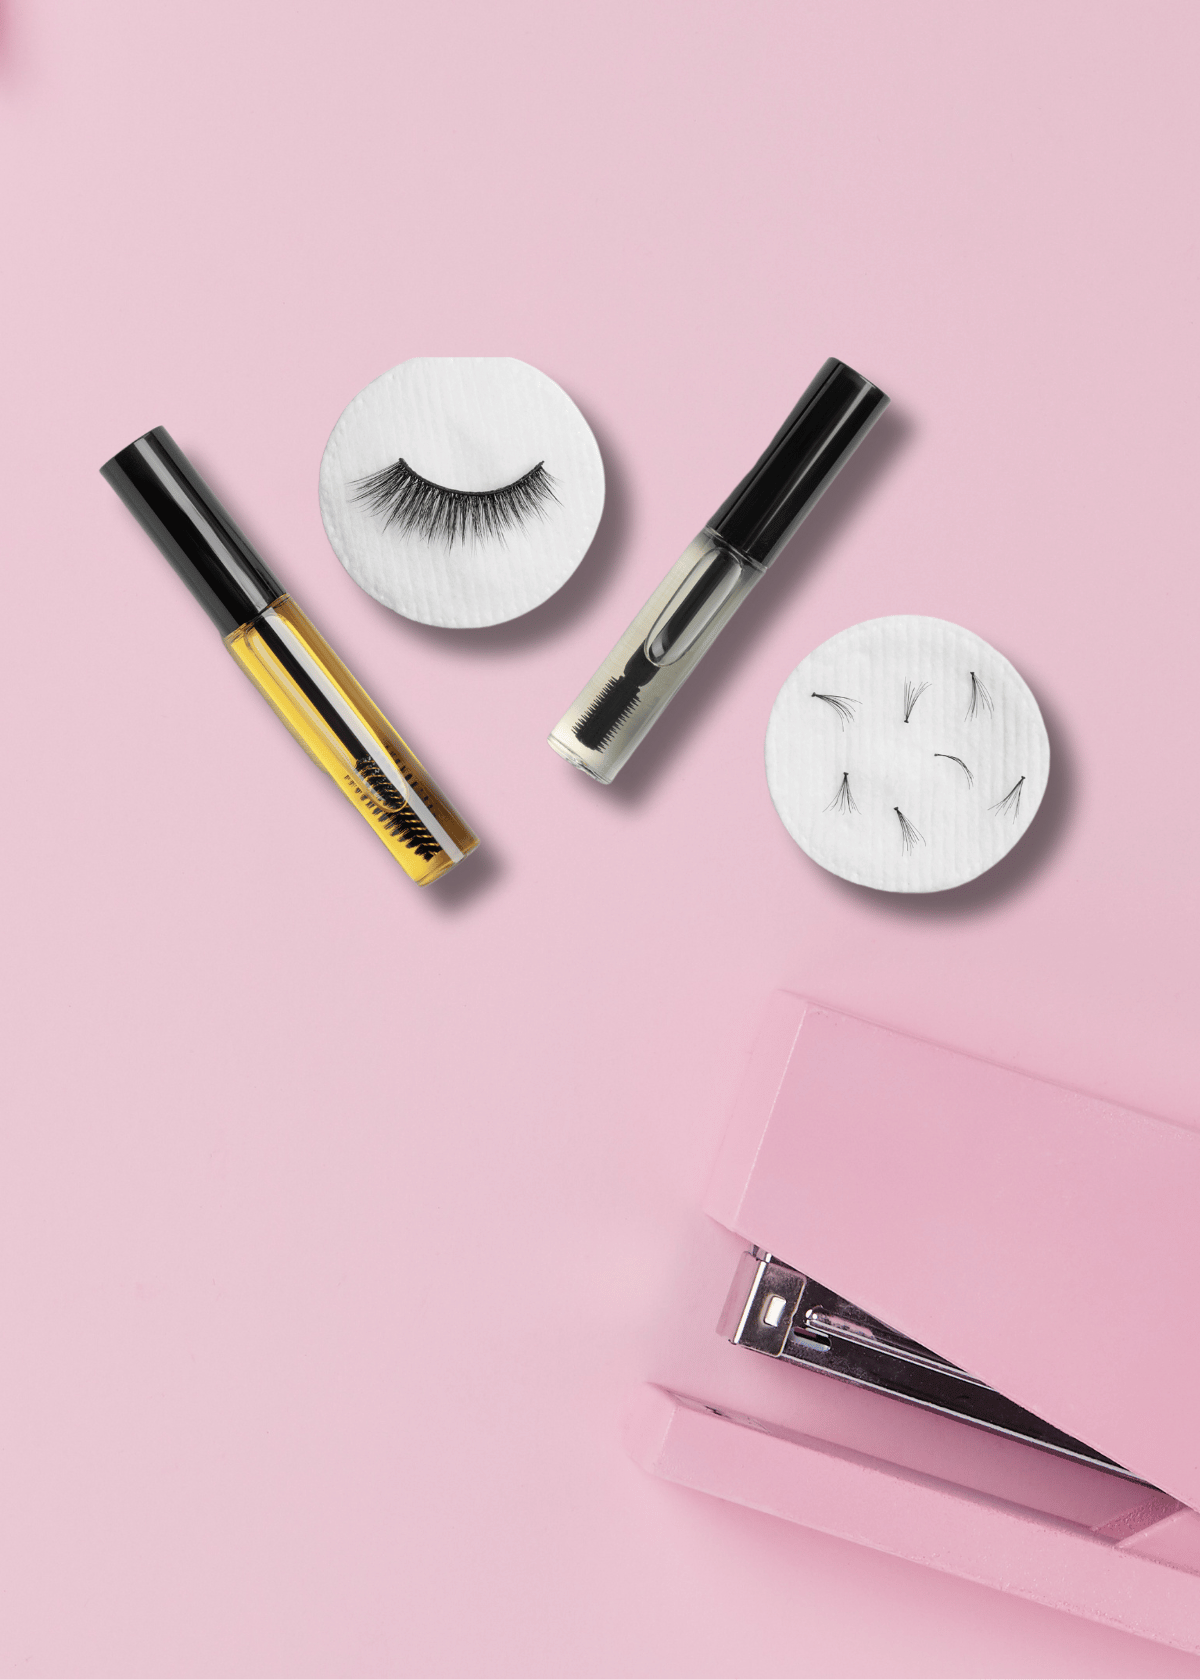 Choose the Best Lash Shampoo Now! Top 5 Products Reviewed